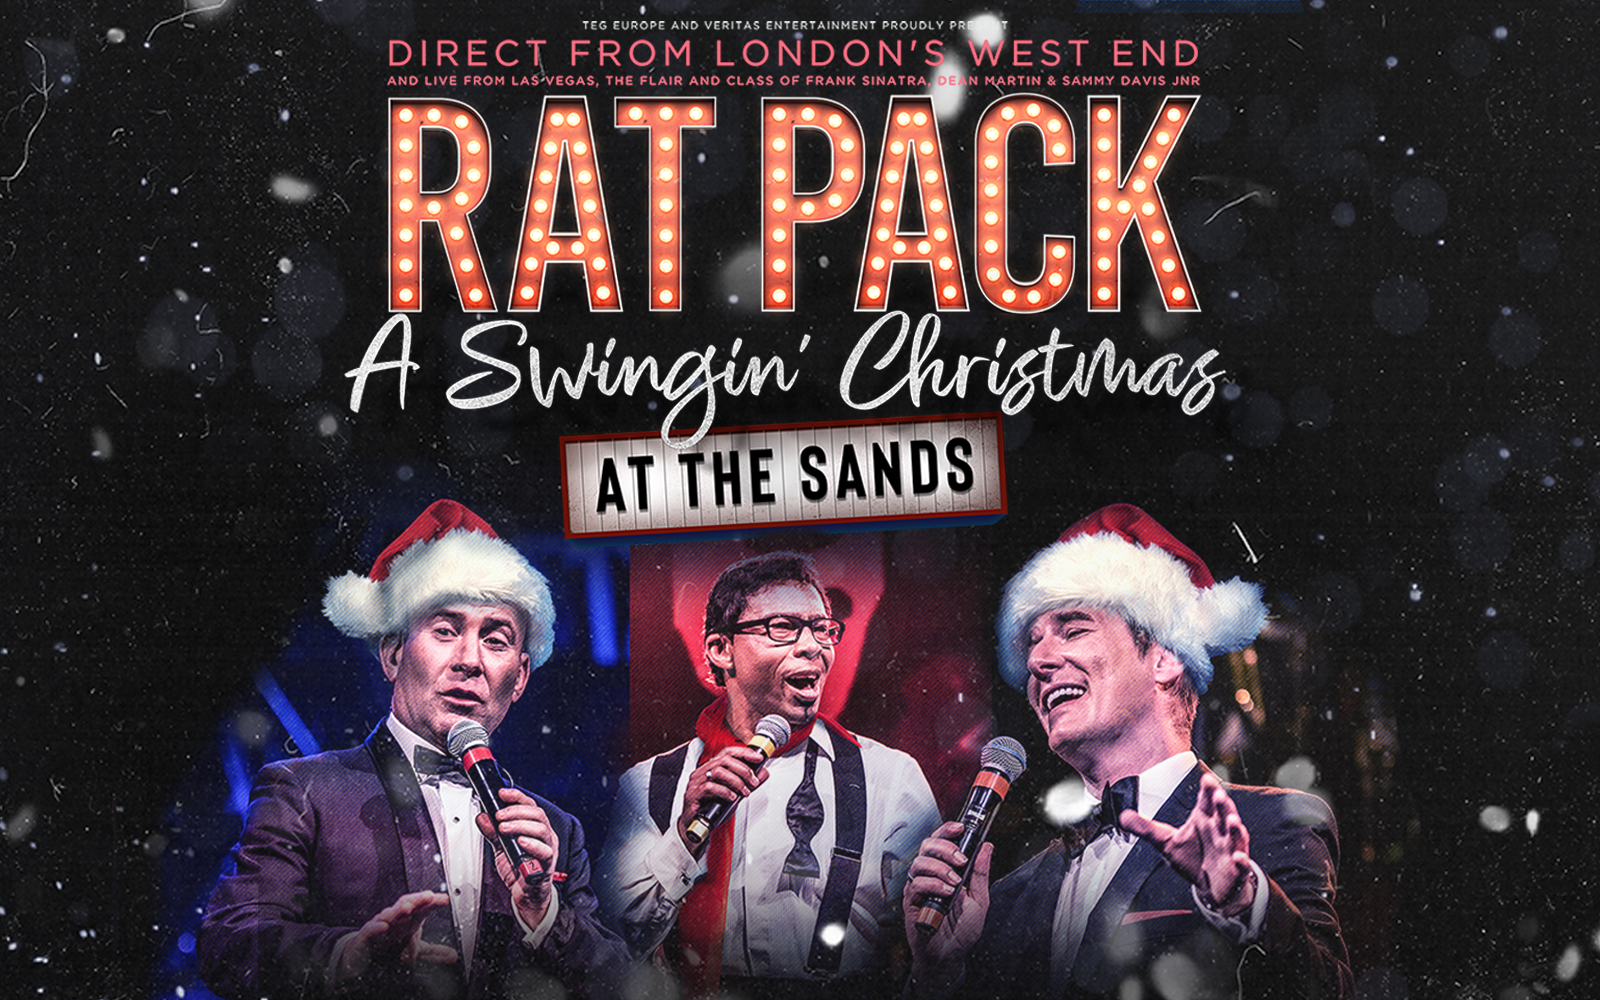 The Rat Pack - A Swingin' Christmas at the Sands